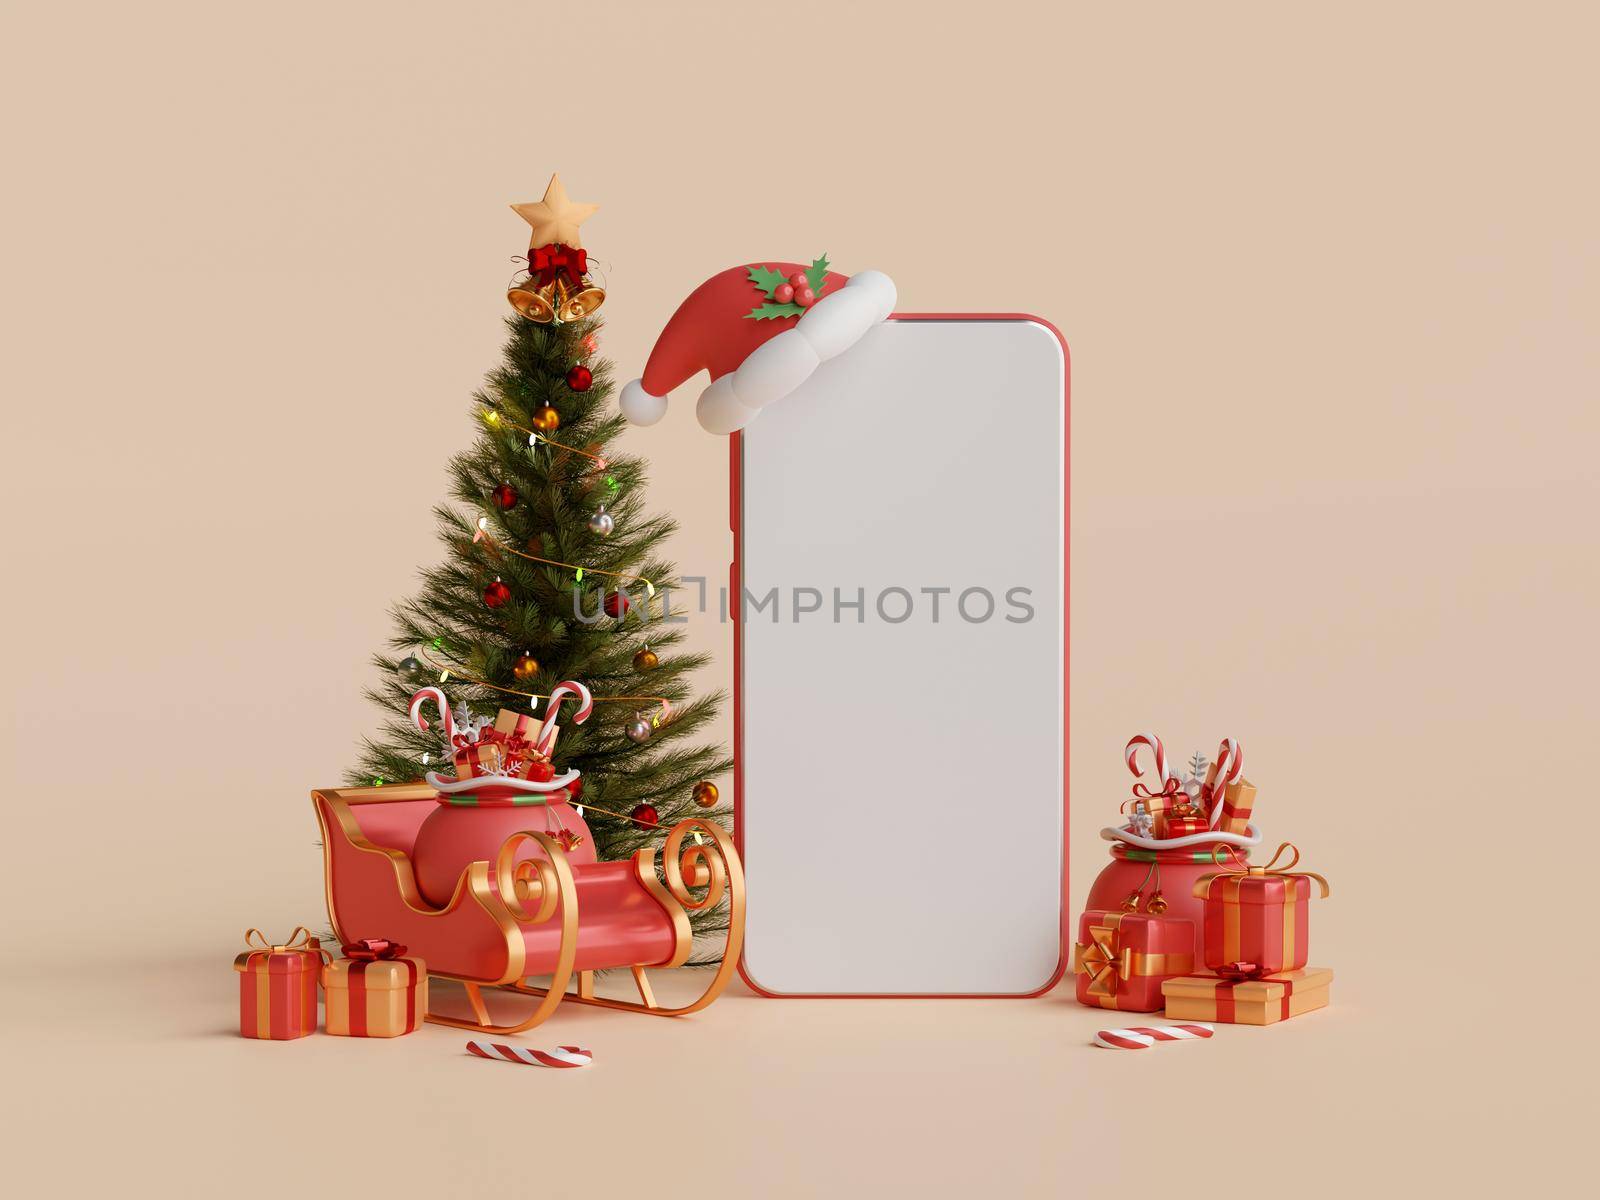 Blank screen mobile with Christmas tree and decoration, 3d illustration by nutzchotwarut